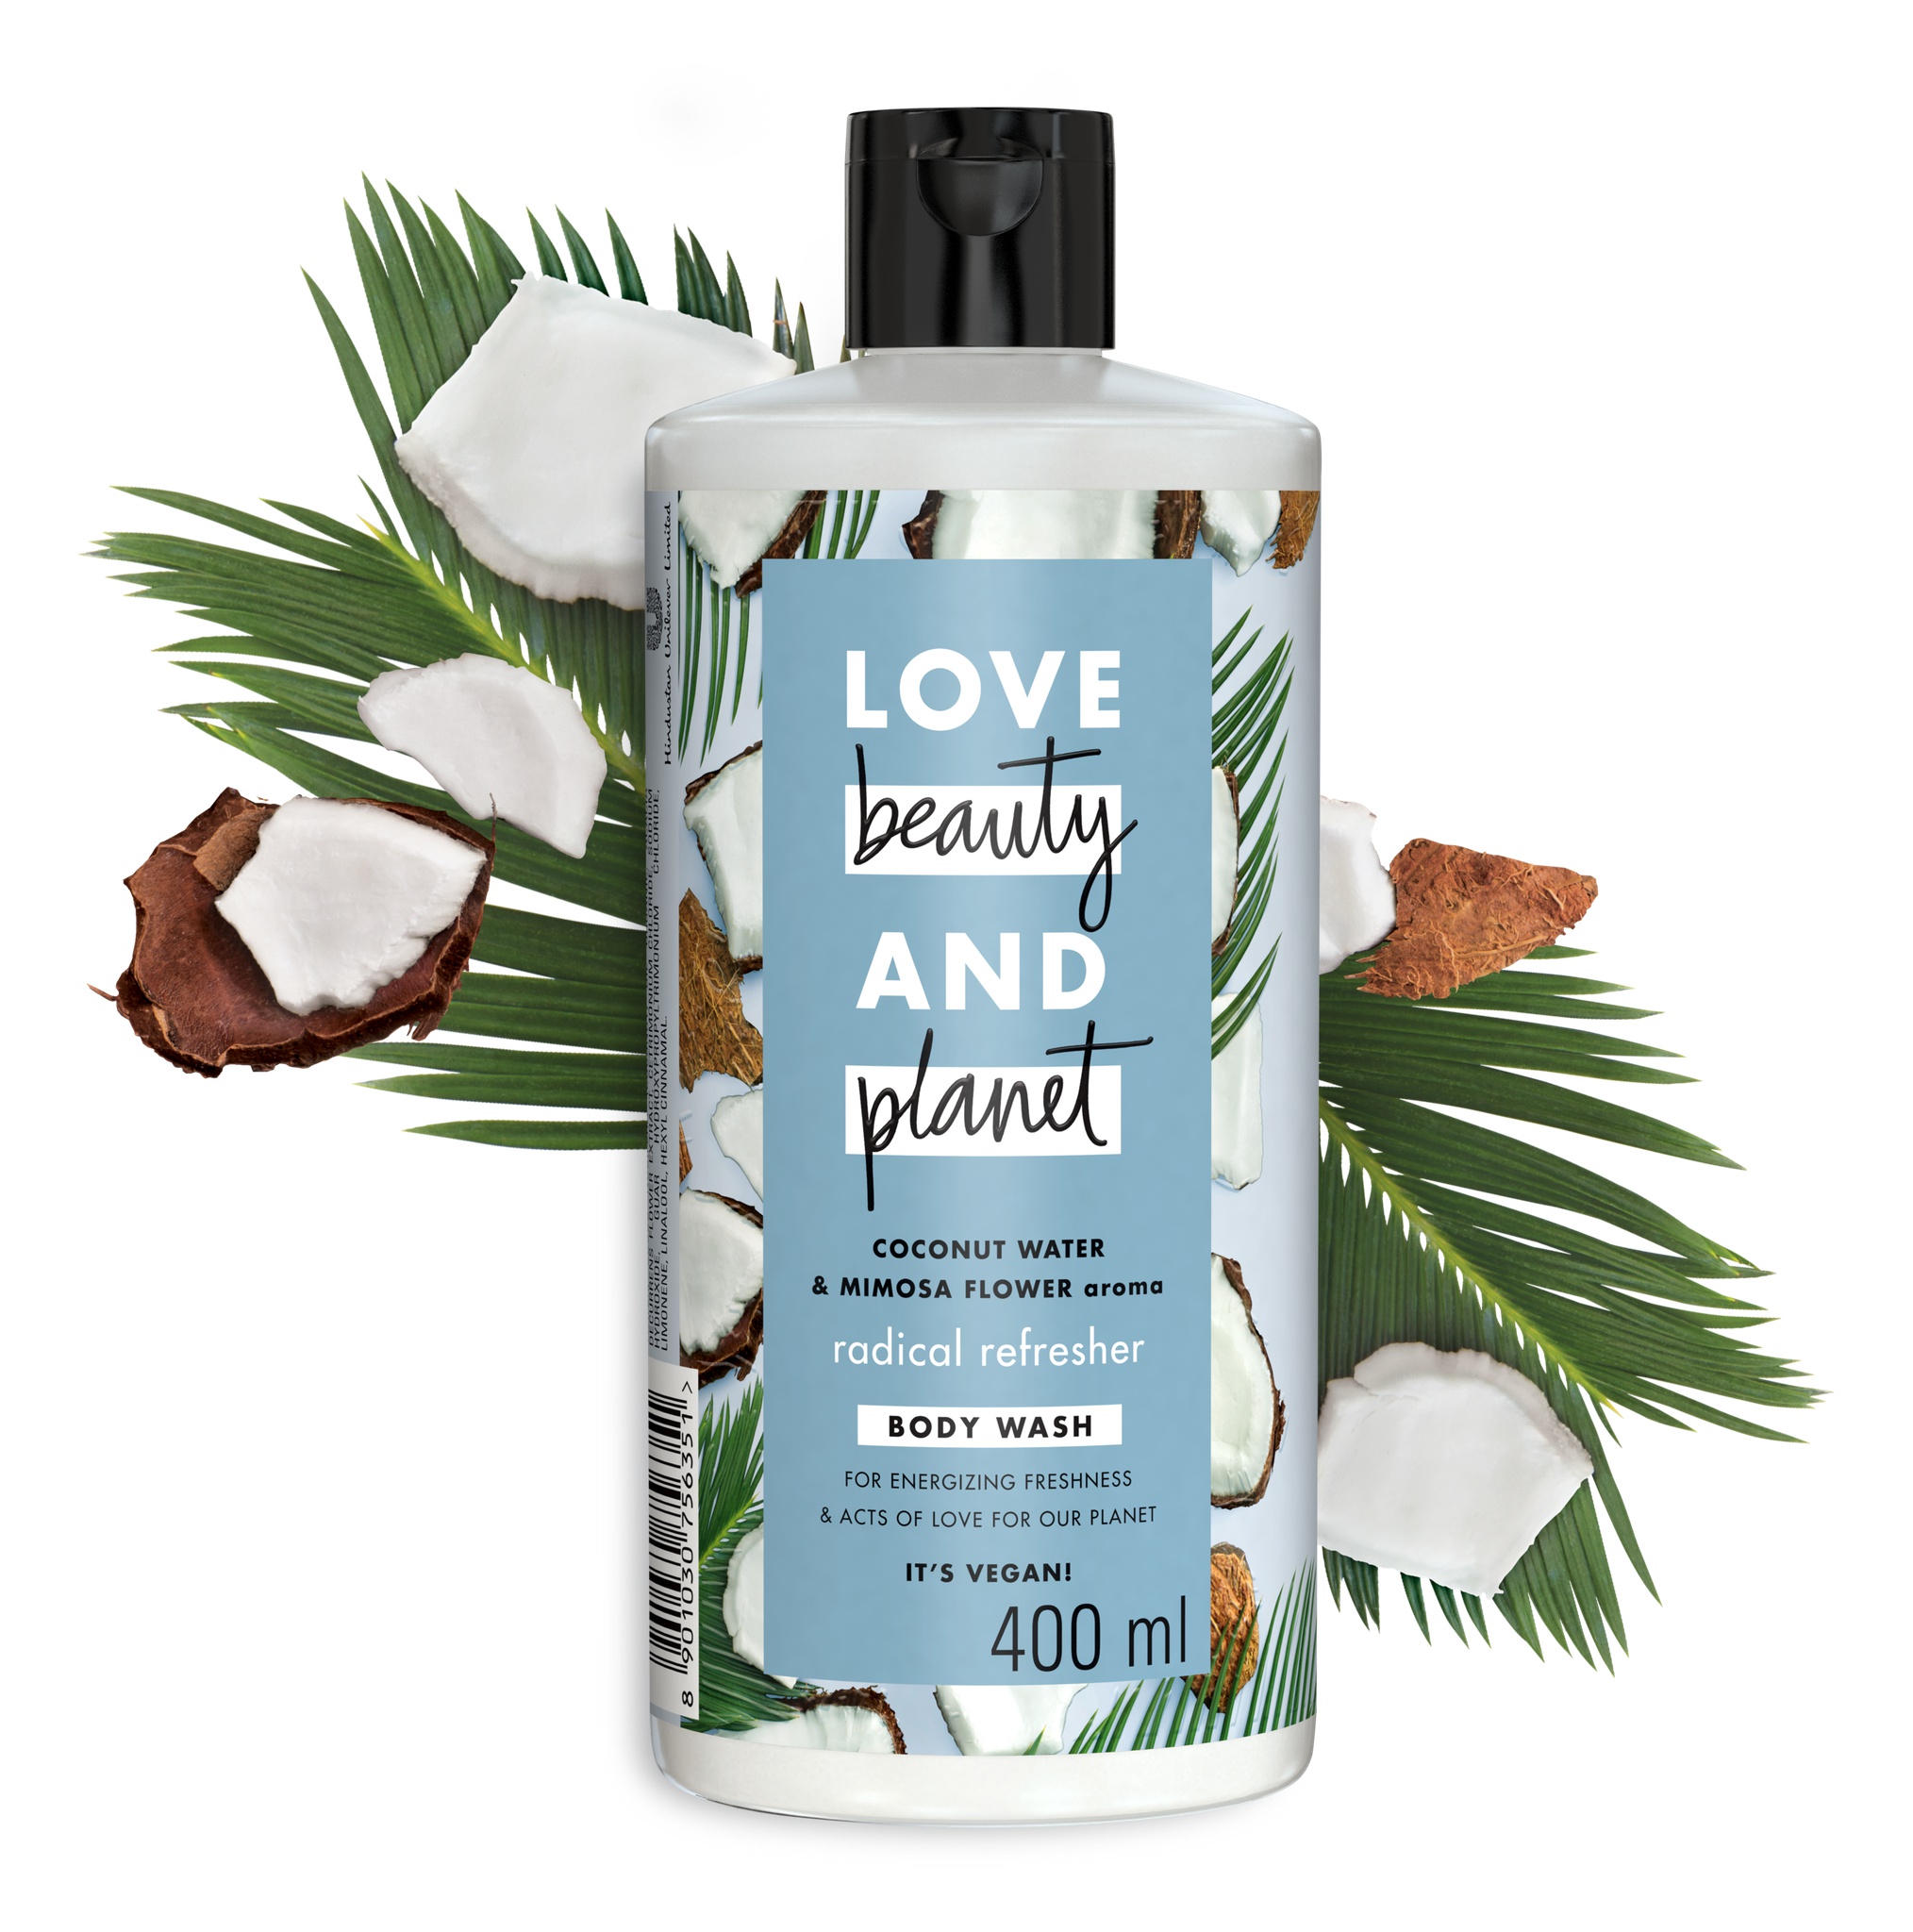 Love beauty and planet Coconut Water & Mimosa Flower Body Wash